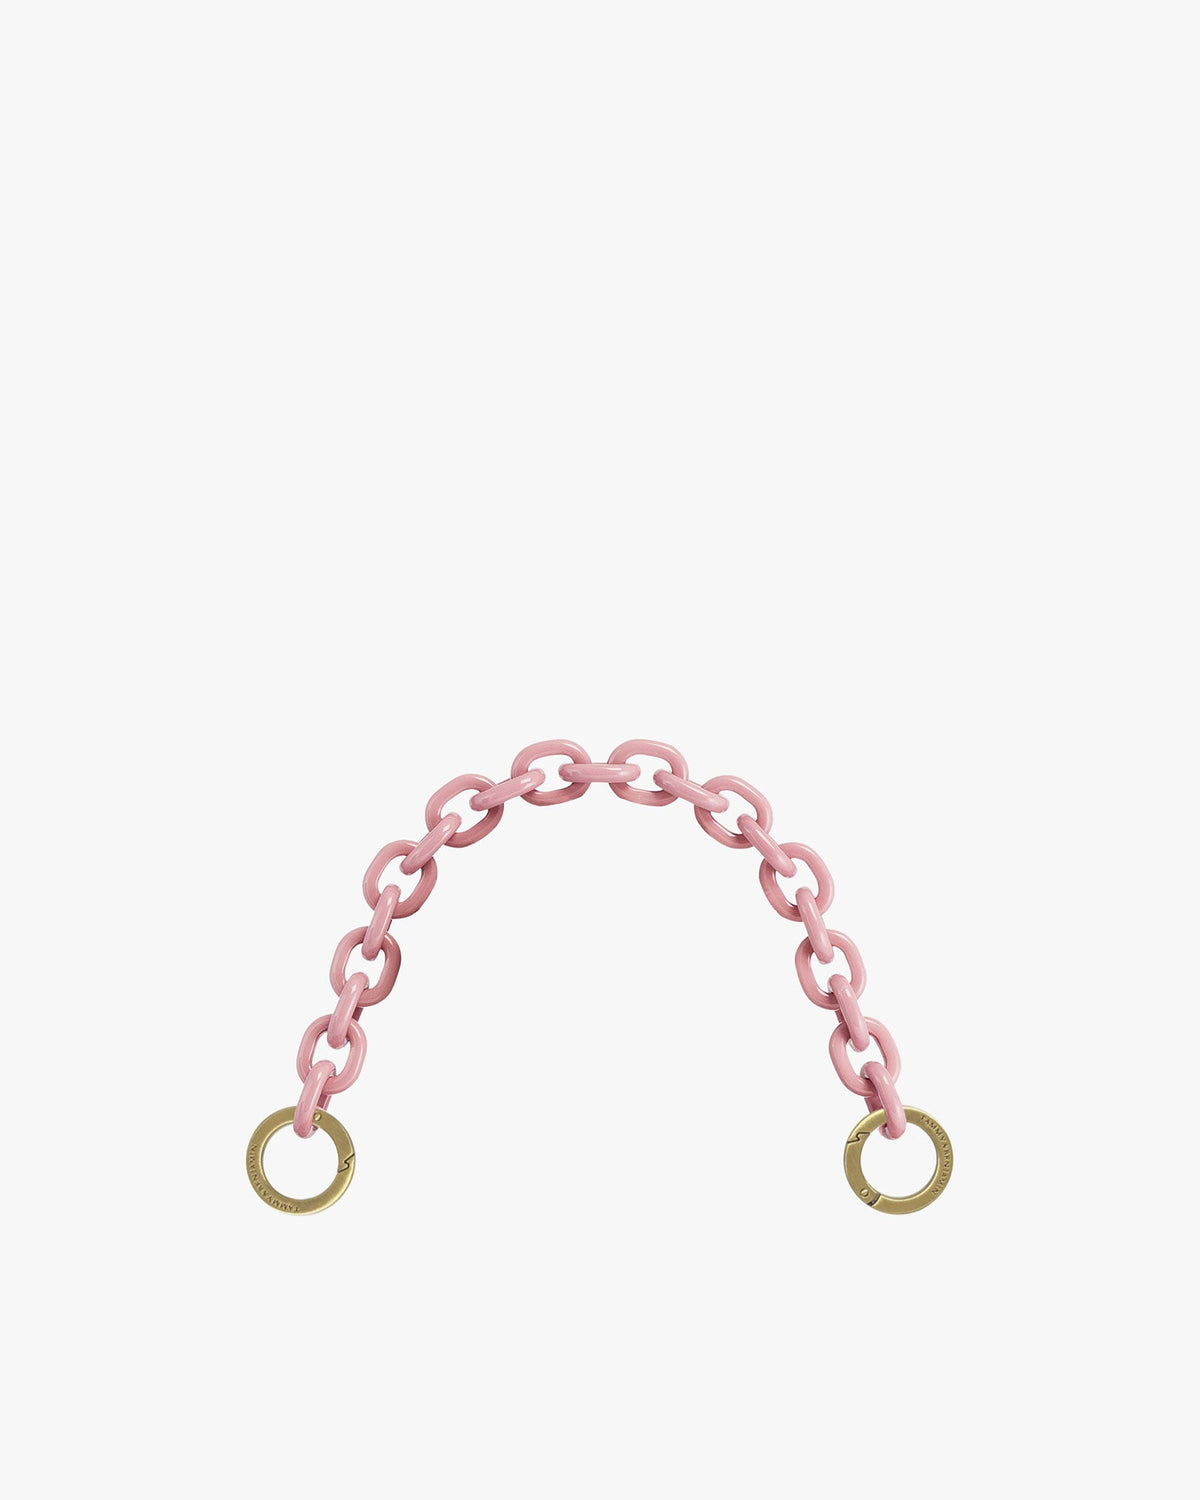 CHAIN 40 cm - Smoked pink resin